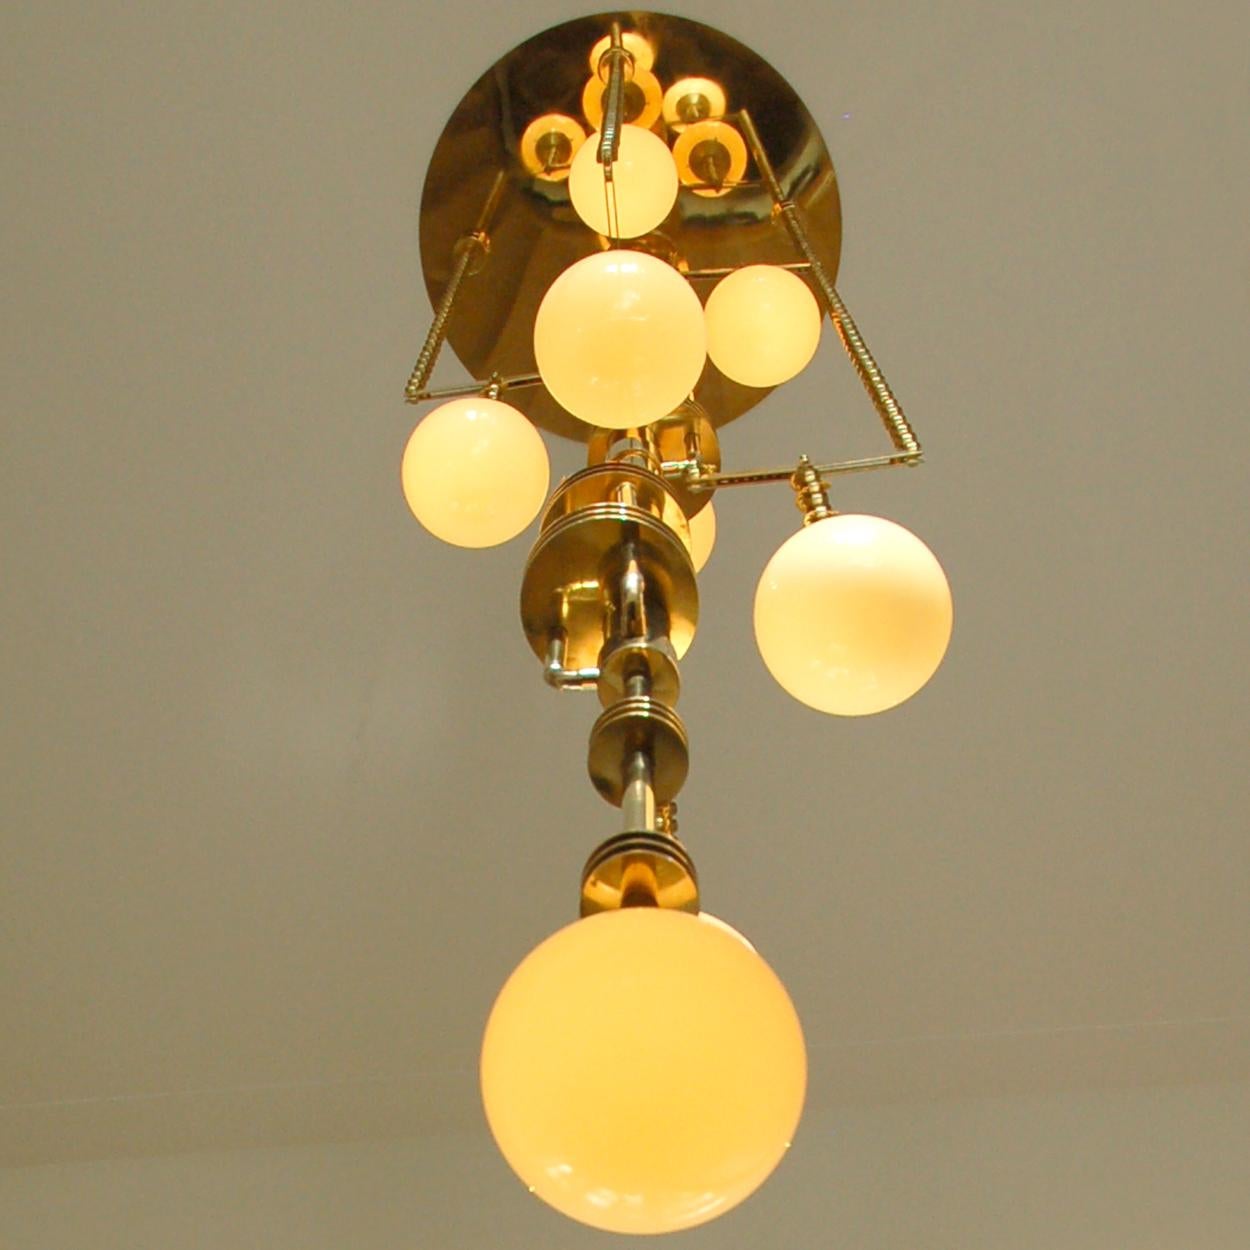 Art Deco Style Handmade Cascade Full Brass and Glass Light Fixture, Contemporary In New Condition For Sale In Rijssen, NL